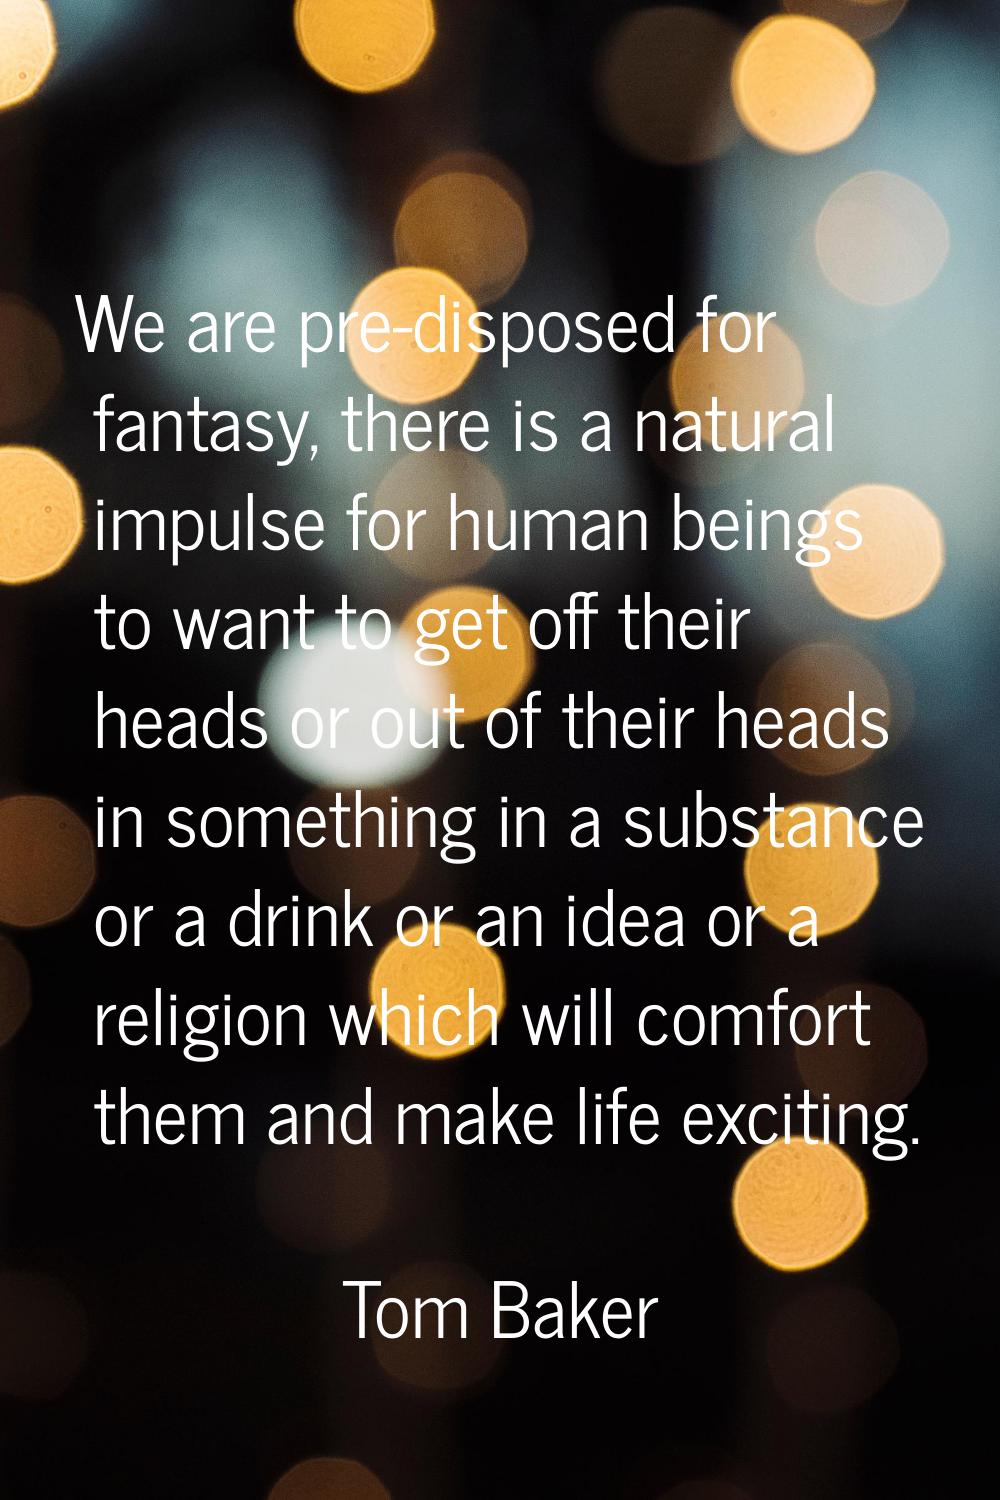 We are pre-disposed for fantasy, there is a natural impulse for human beings to want to get off the